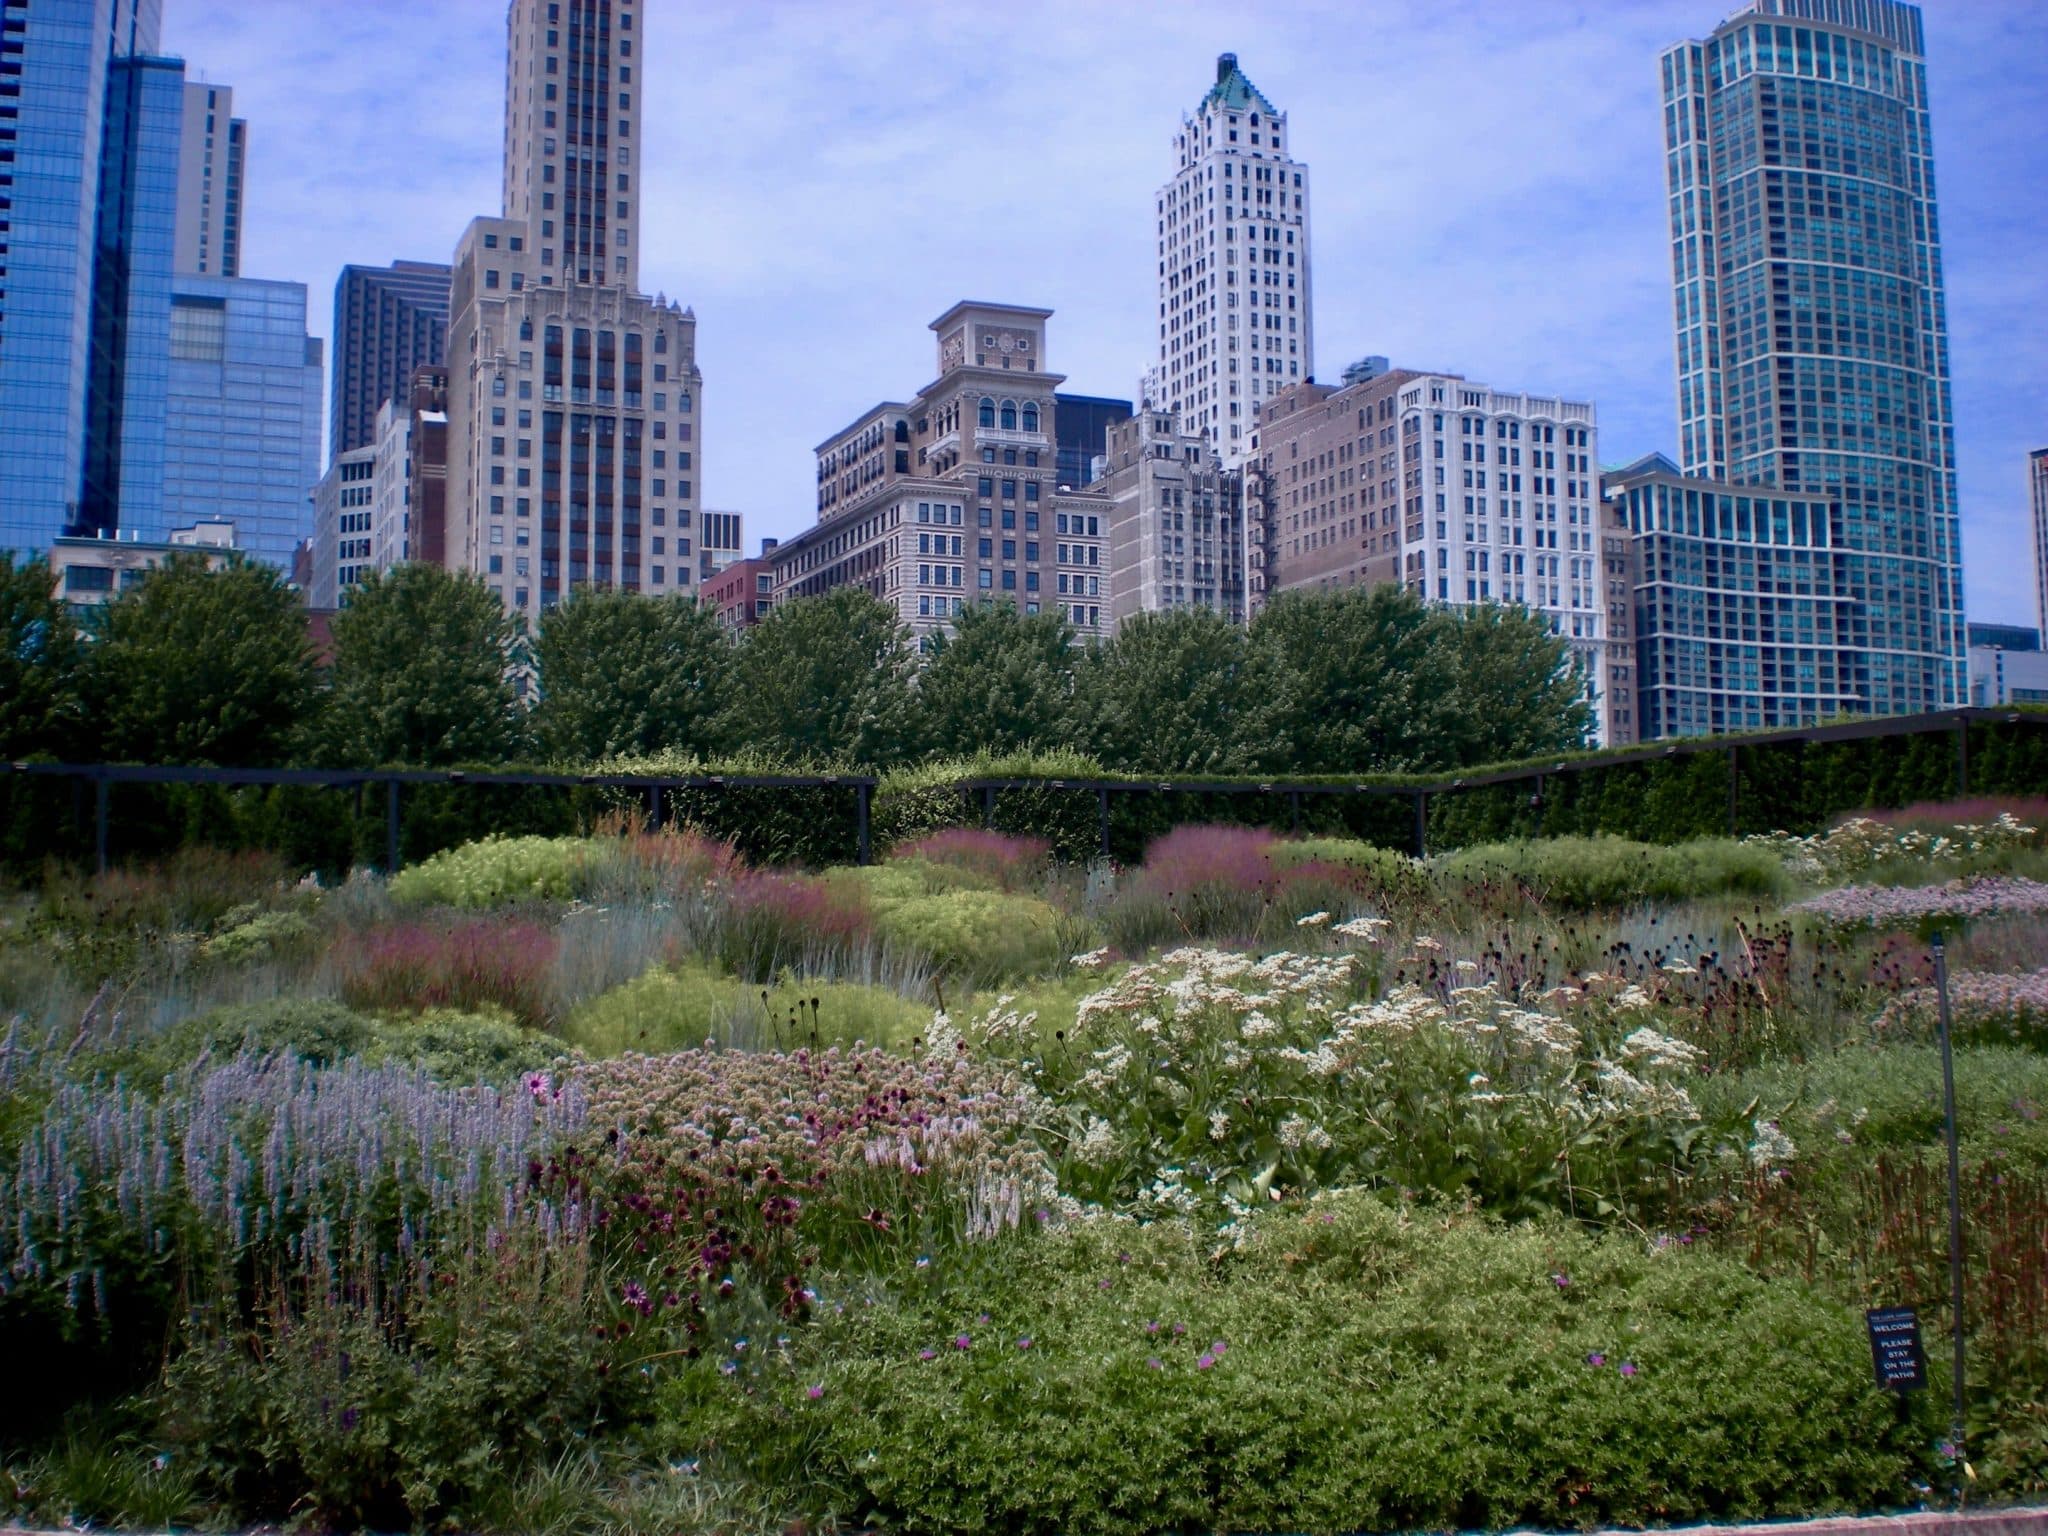 hundreds of flowers and shrubs at Lurie Garden in Millenium Park Chicago